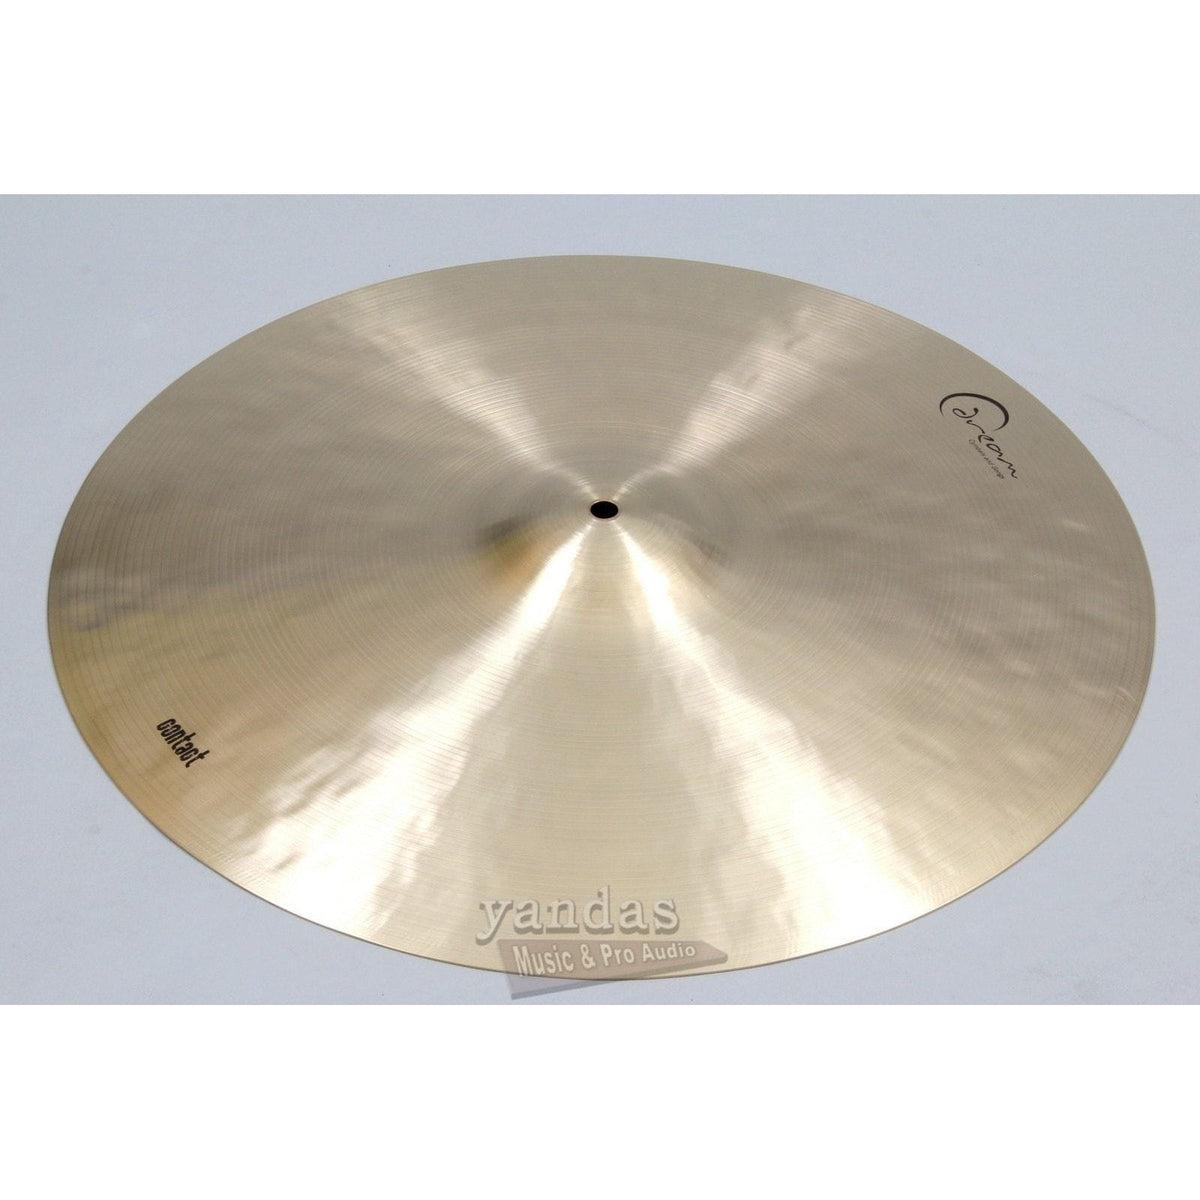 Dream Cymbals Contact Series Ride Cymbal 20 Inch